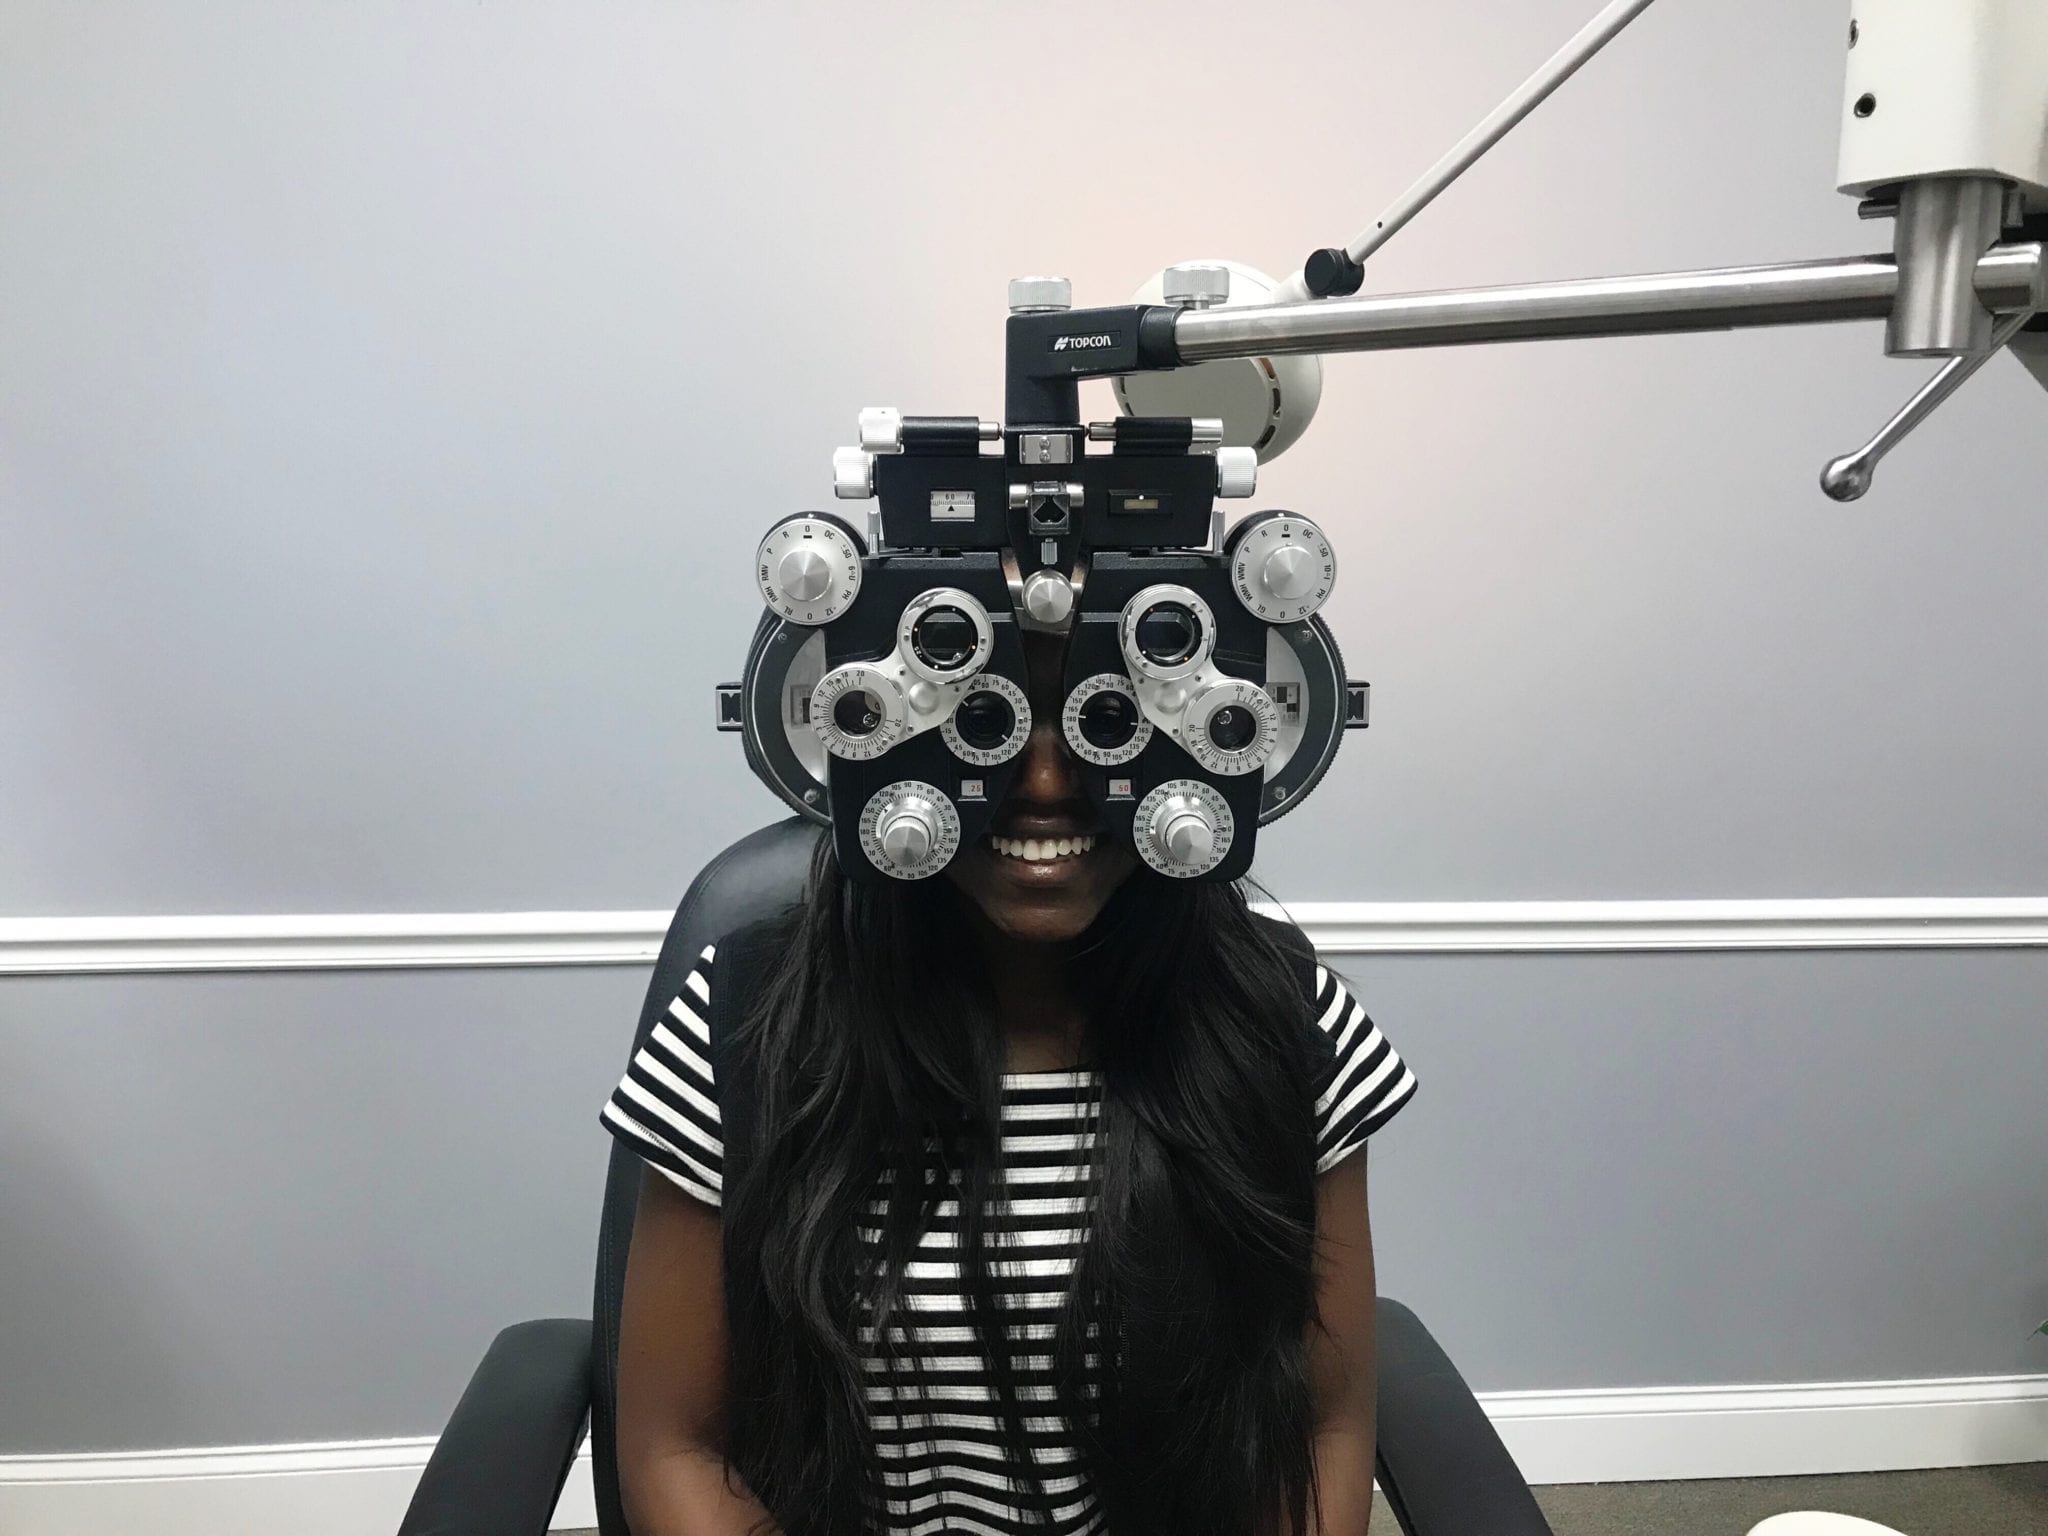 Southern Fashion and Lifestyle Blogger, Tomi from GoodTomiCha, documents her journey from glasses to Acuvue brand contact lenses. After suffering from blurry vision and sensitive eyes, she was ready for a change! Read more on the blog: GoodTomiCha.com